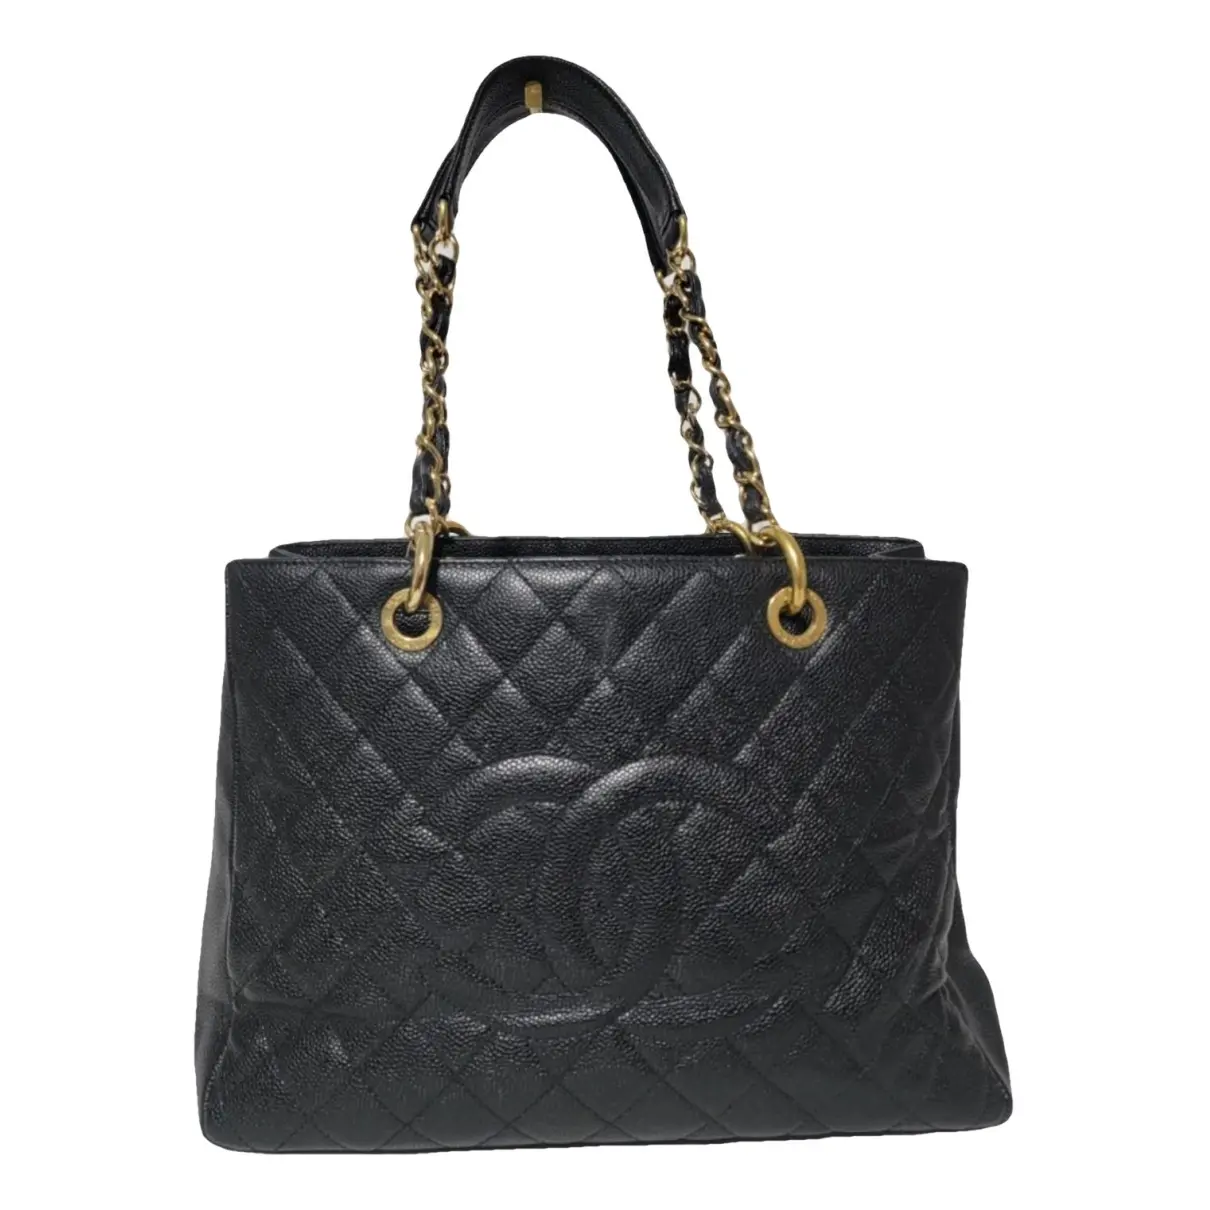 Trendy CC Quilted leather tote